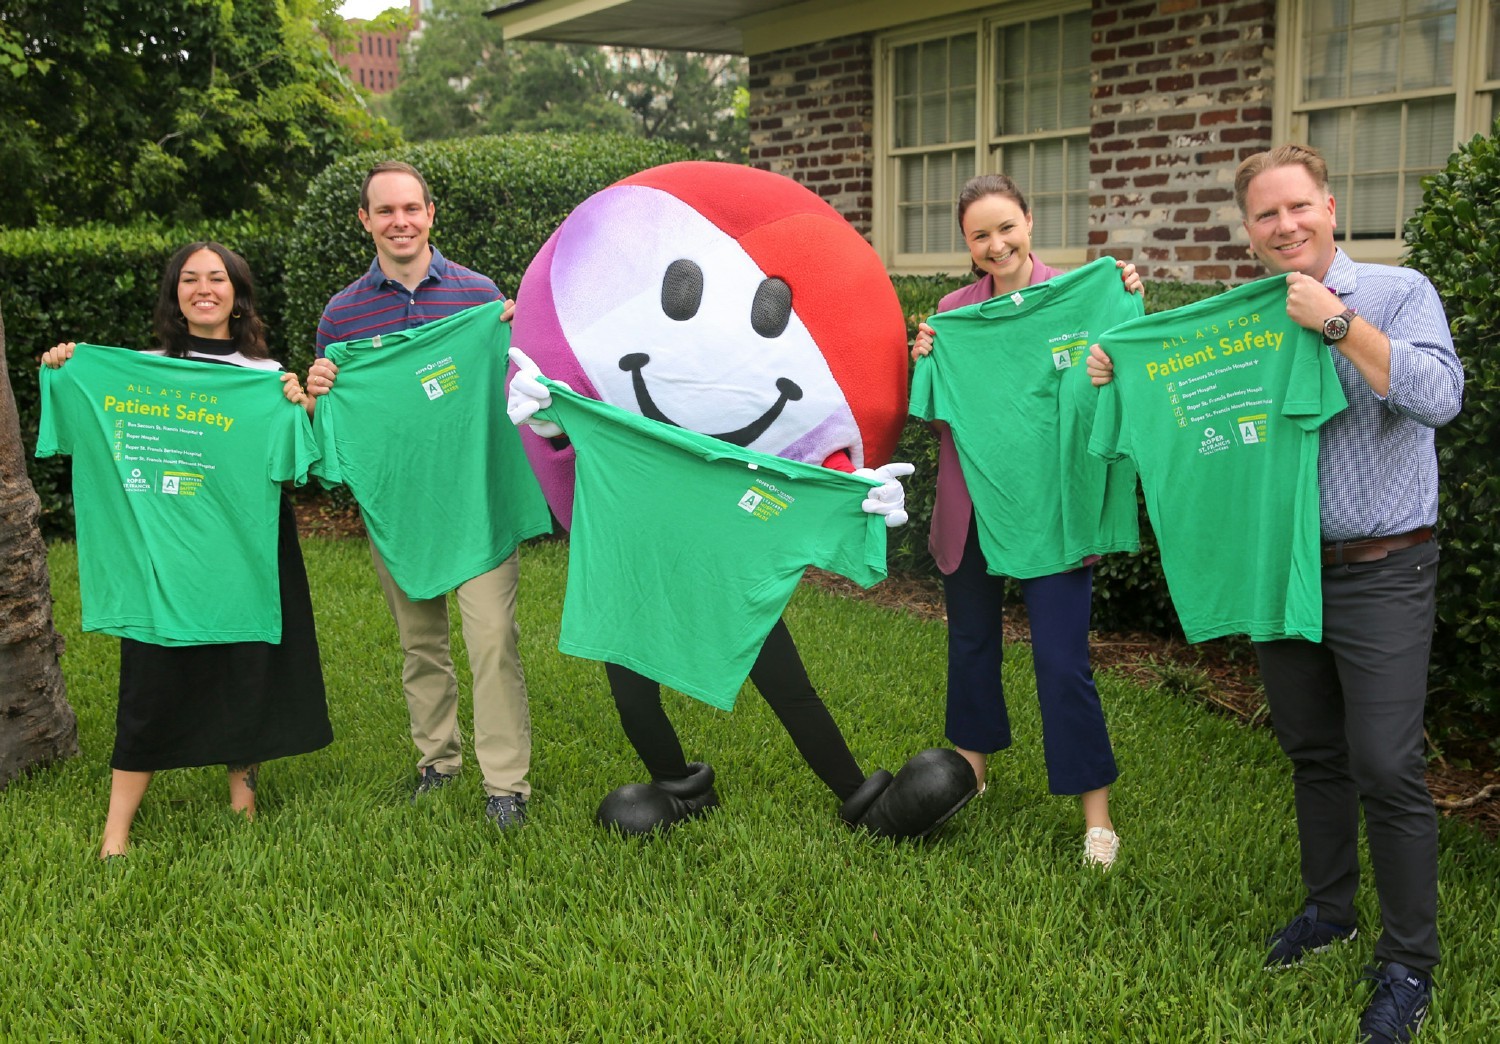 Celebrating all four hospitals receiving an “A” for Leapfrog Safety Grades for the first time with free T-shirts for all